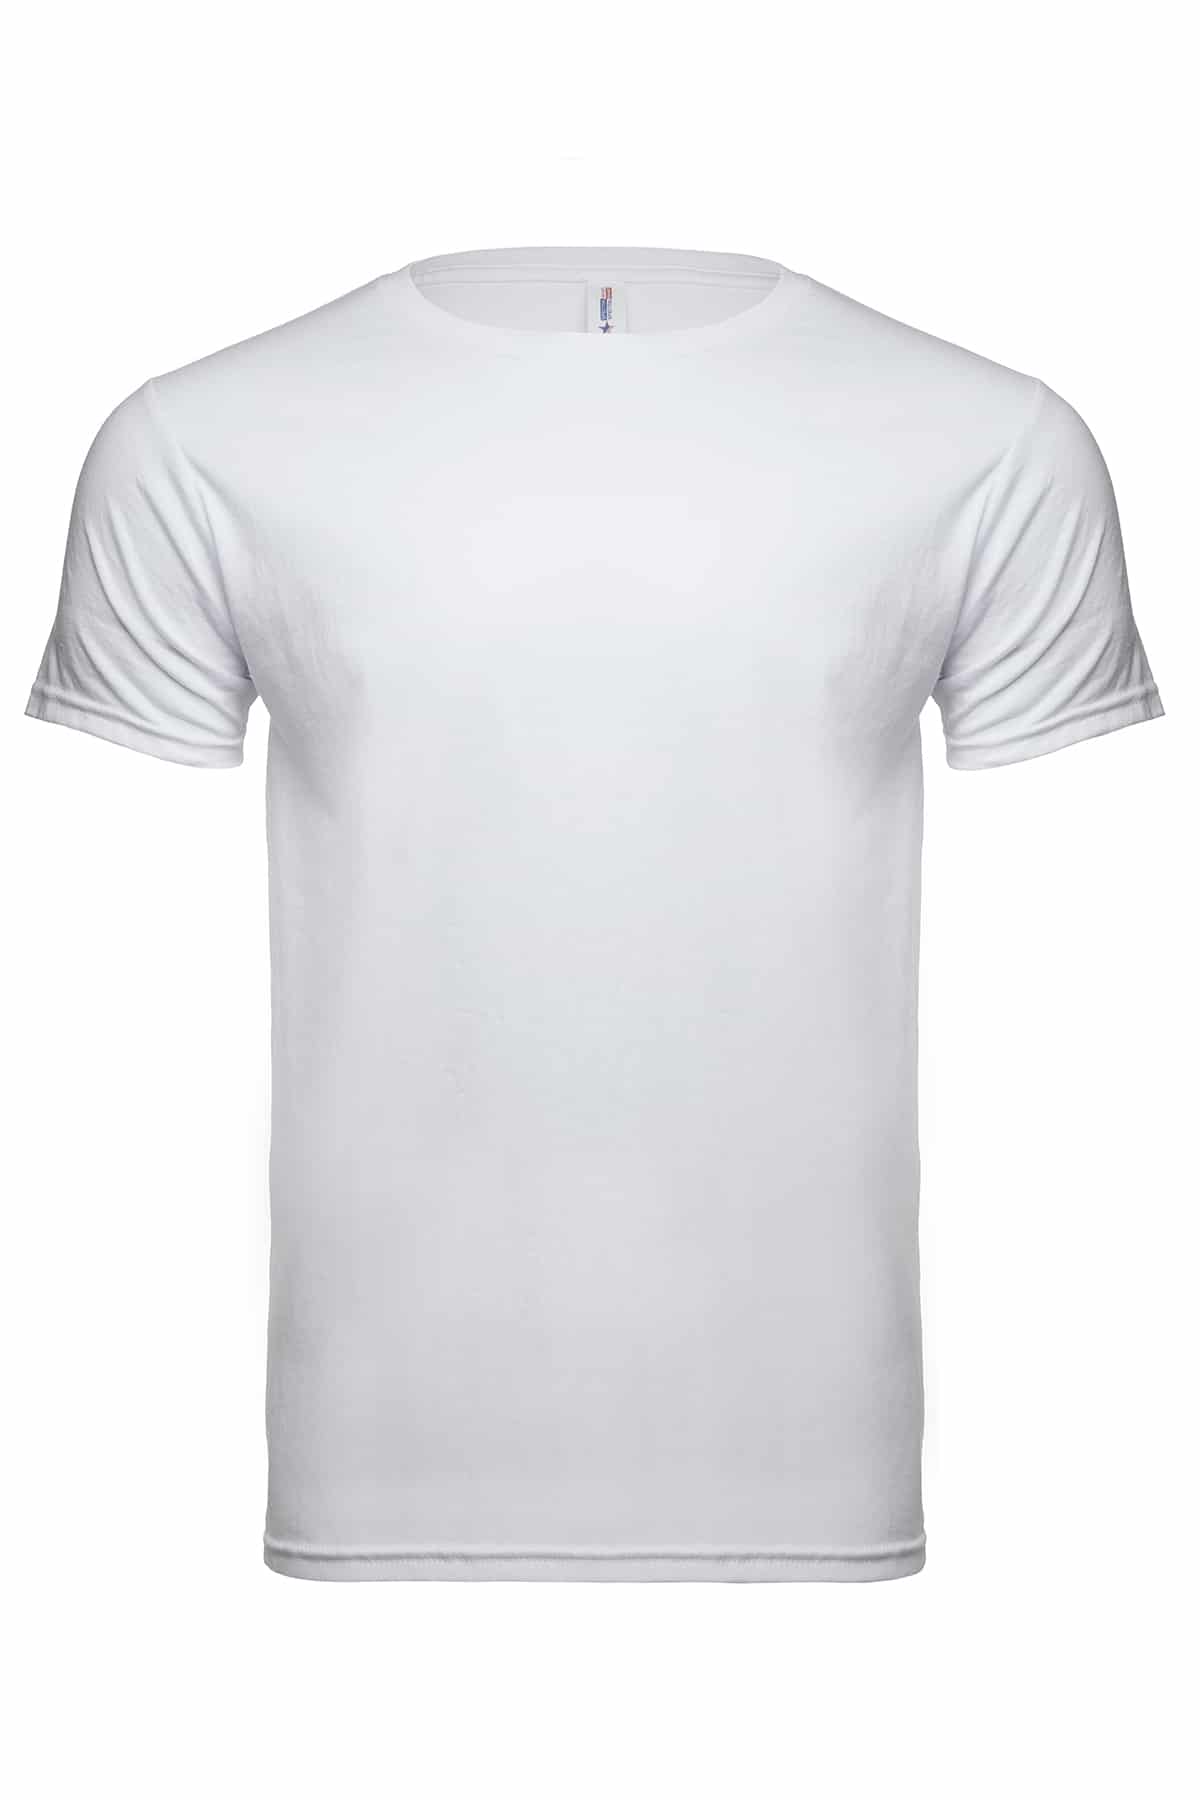 3050 White Front T-shirt